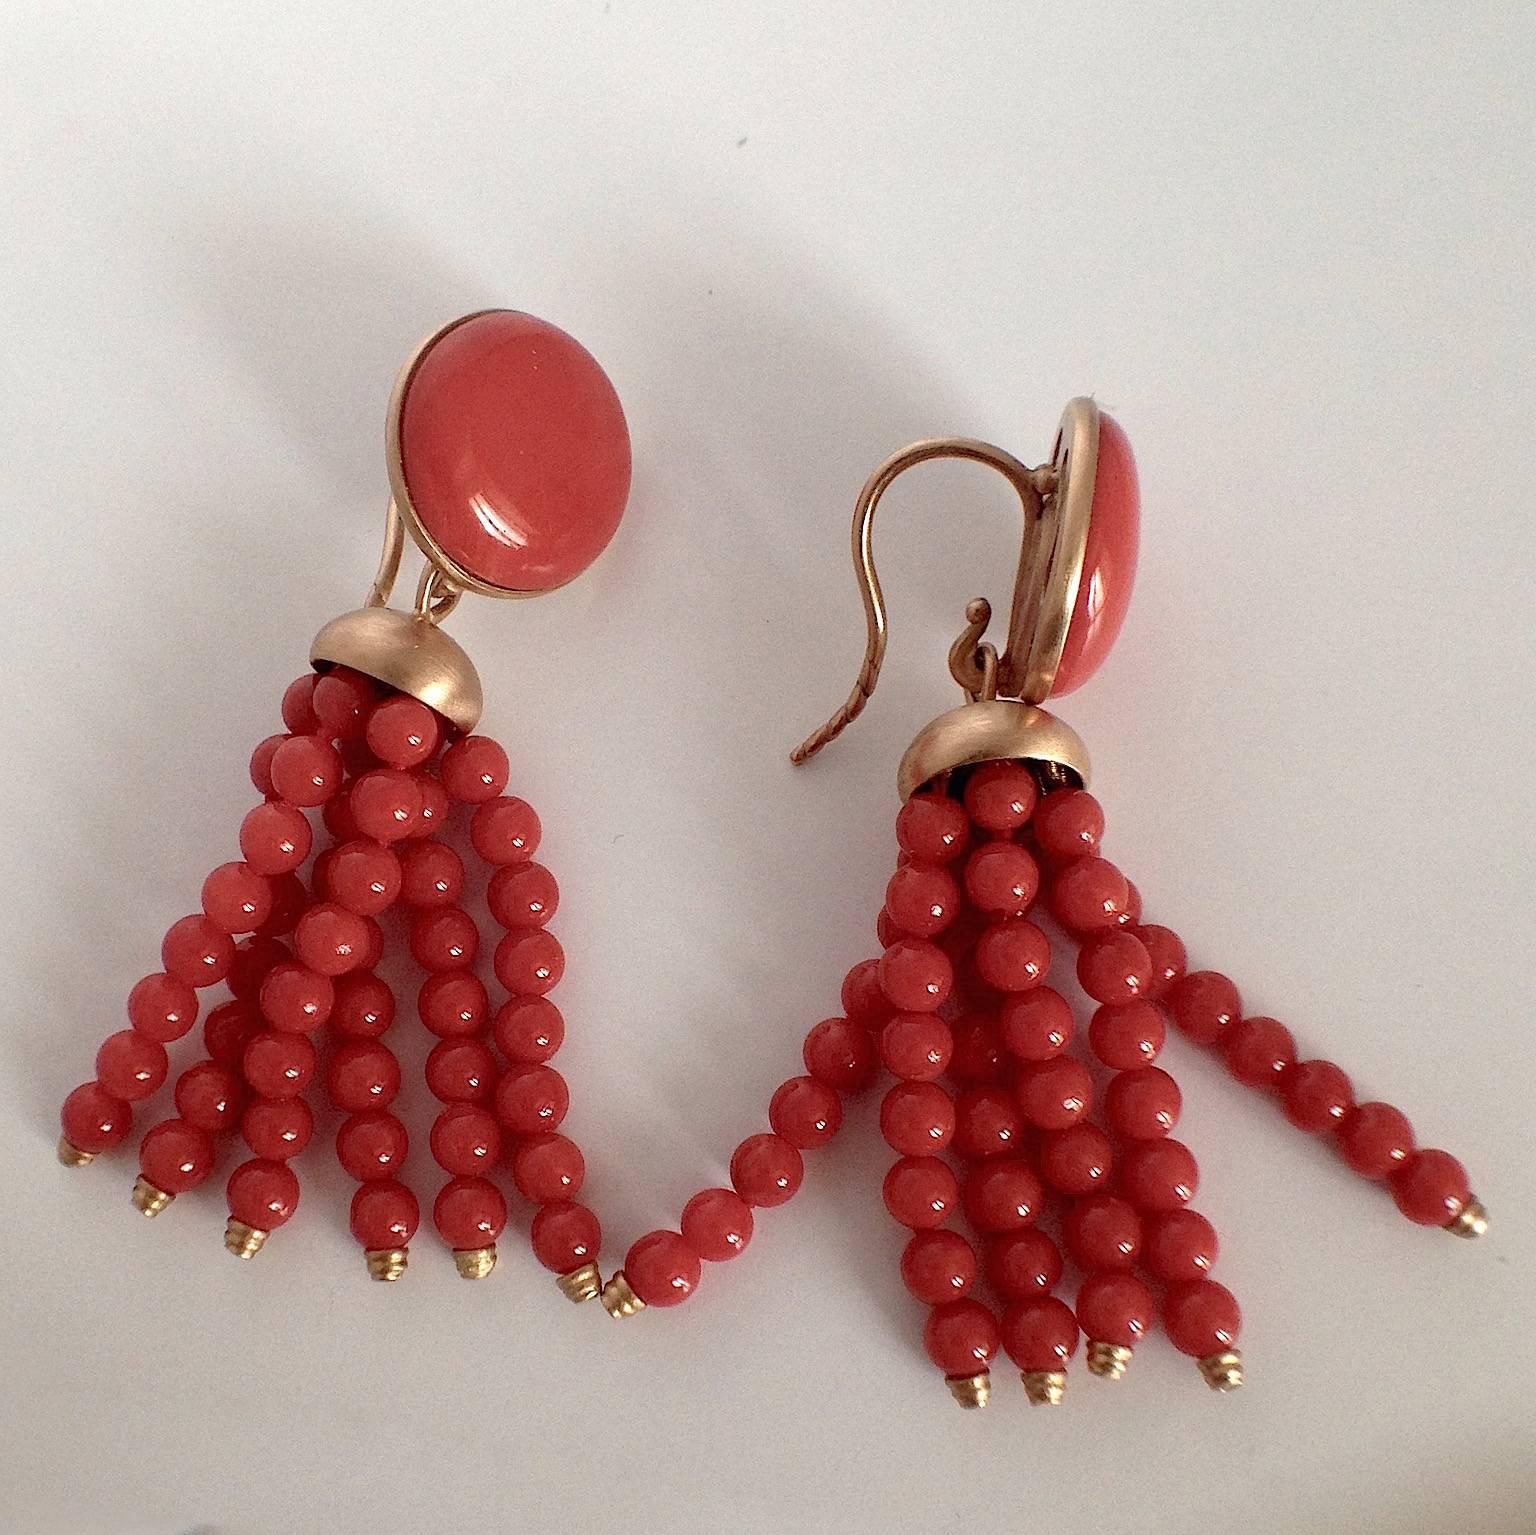 Red Coral Red 18Kt Gold Stud Drop Earrings Ancient Roman Style Made in italy

These Earrings have two studs in red coral of 16mm diameter. You can remove the red coral tassels from the studs to create a different effect, for each occasion when you